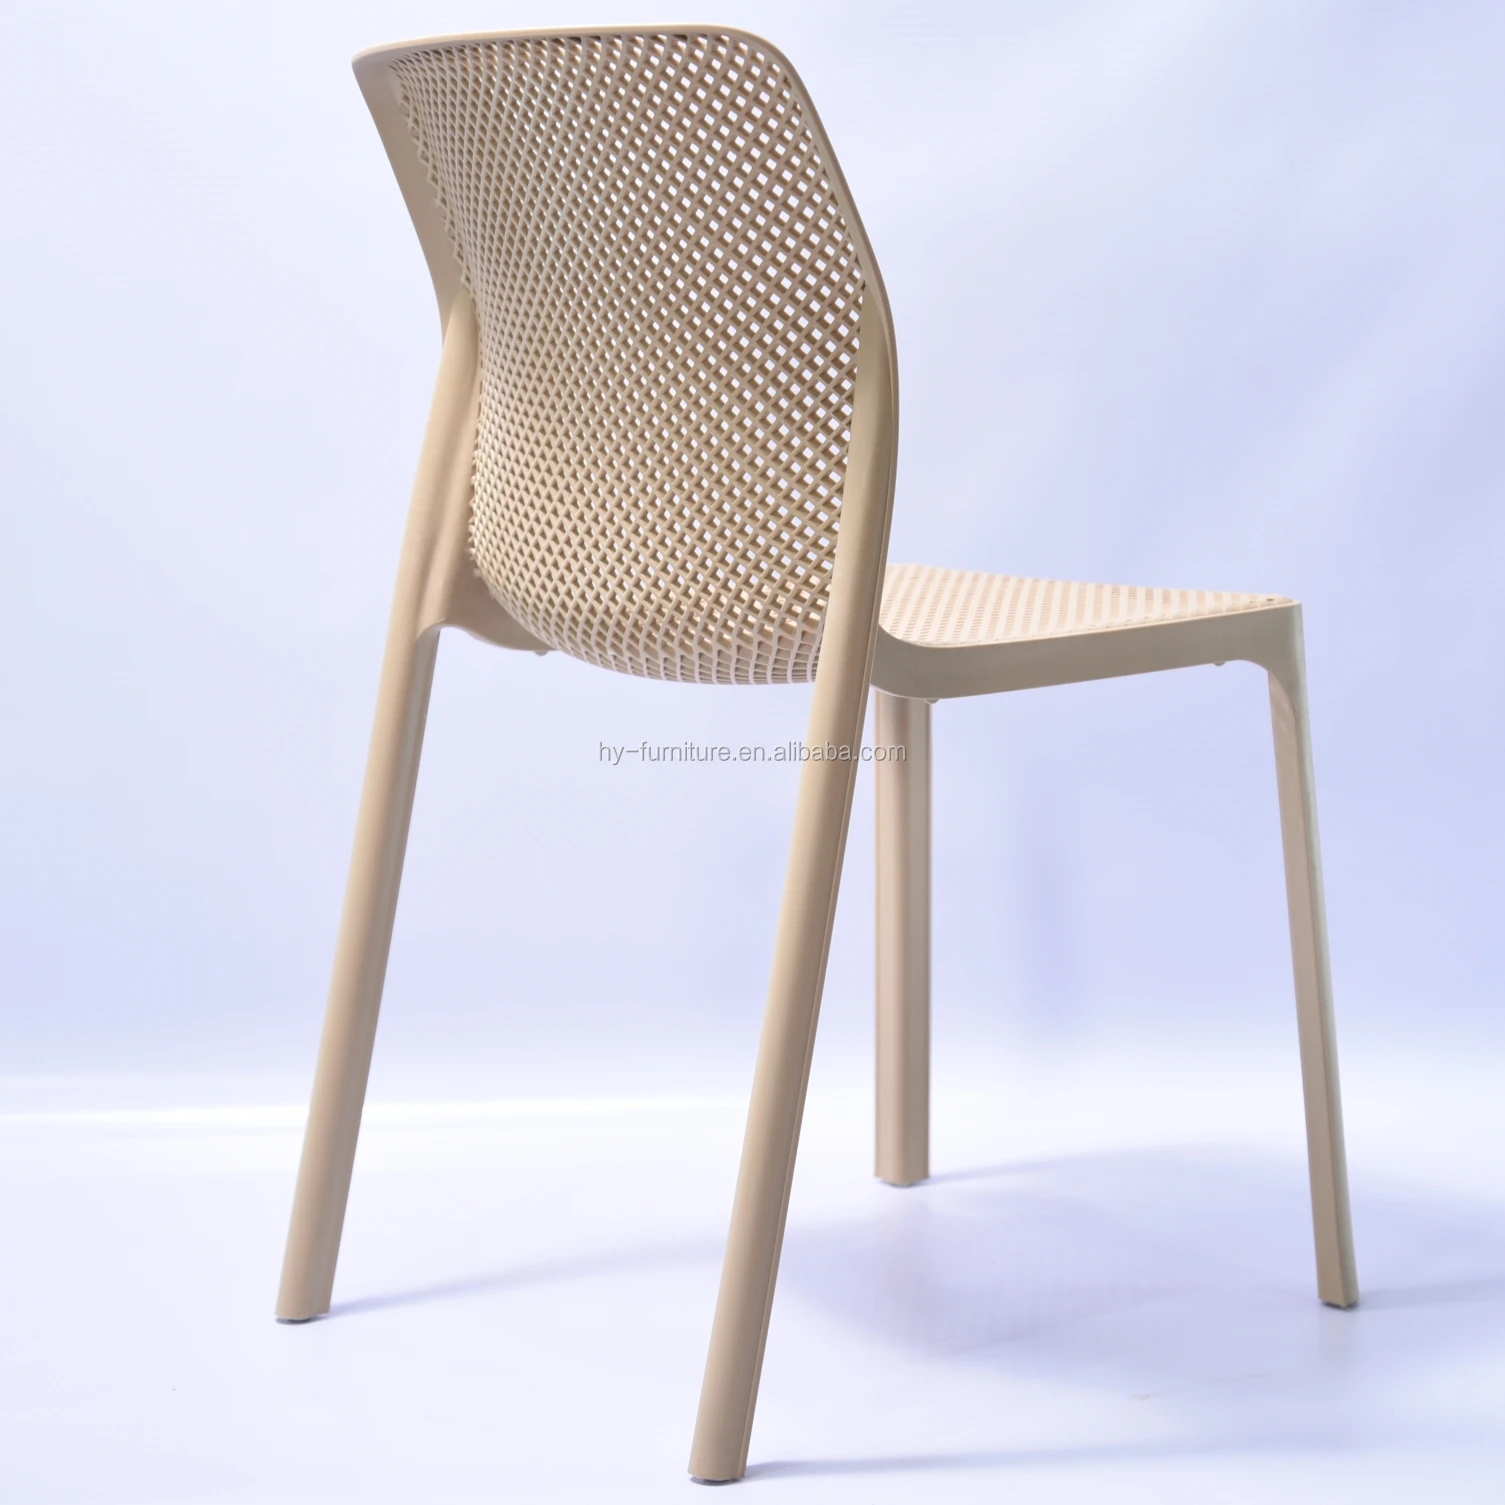 cheap price stackable plastic dining chairs wholesale modern plastic chair  price  buy plastic chair pricecheap plastic chairsplastic chairs